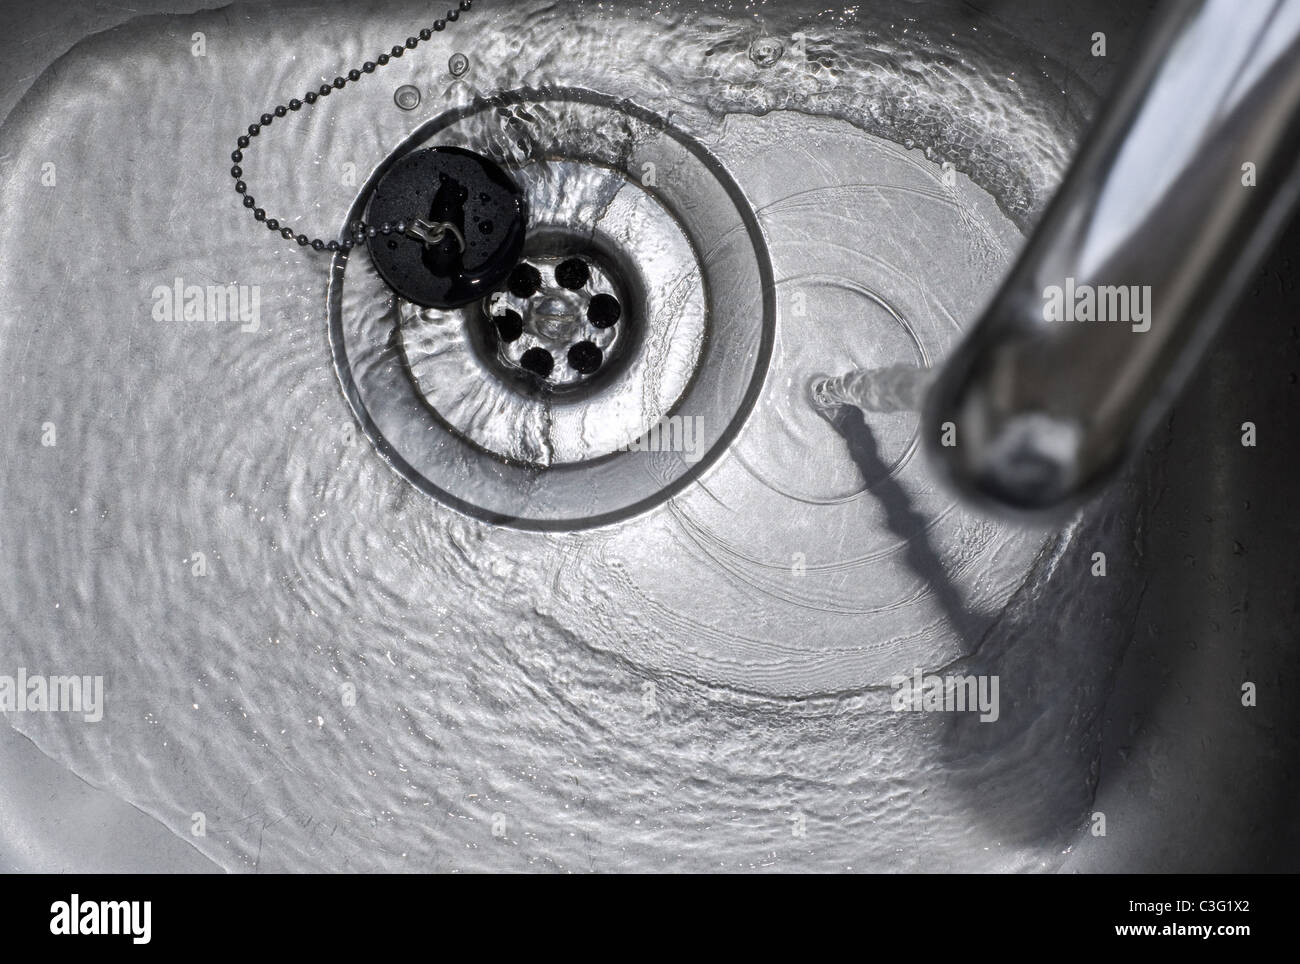 Running Water Draining Down the Plughole in Kitchen Sink Stock Photo